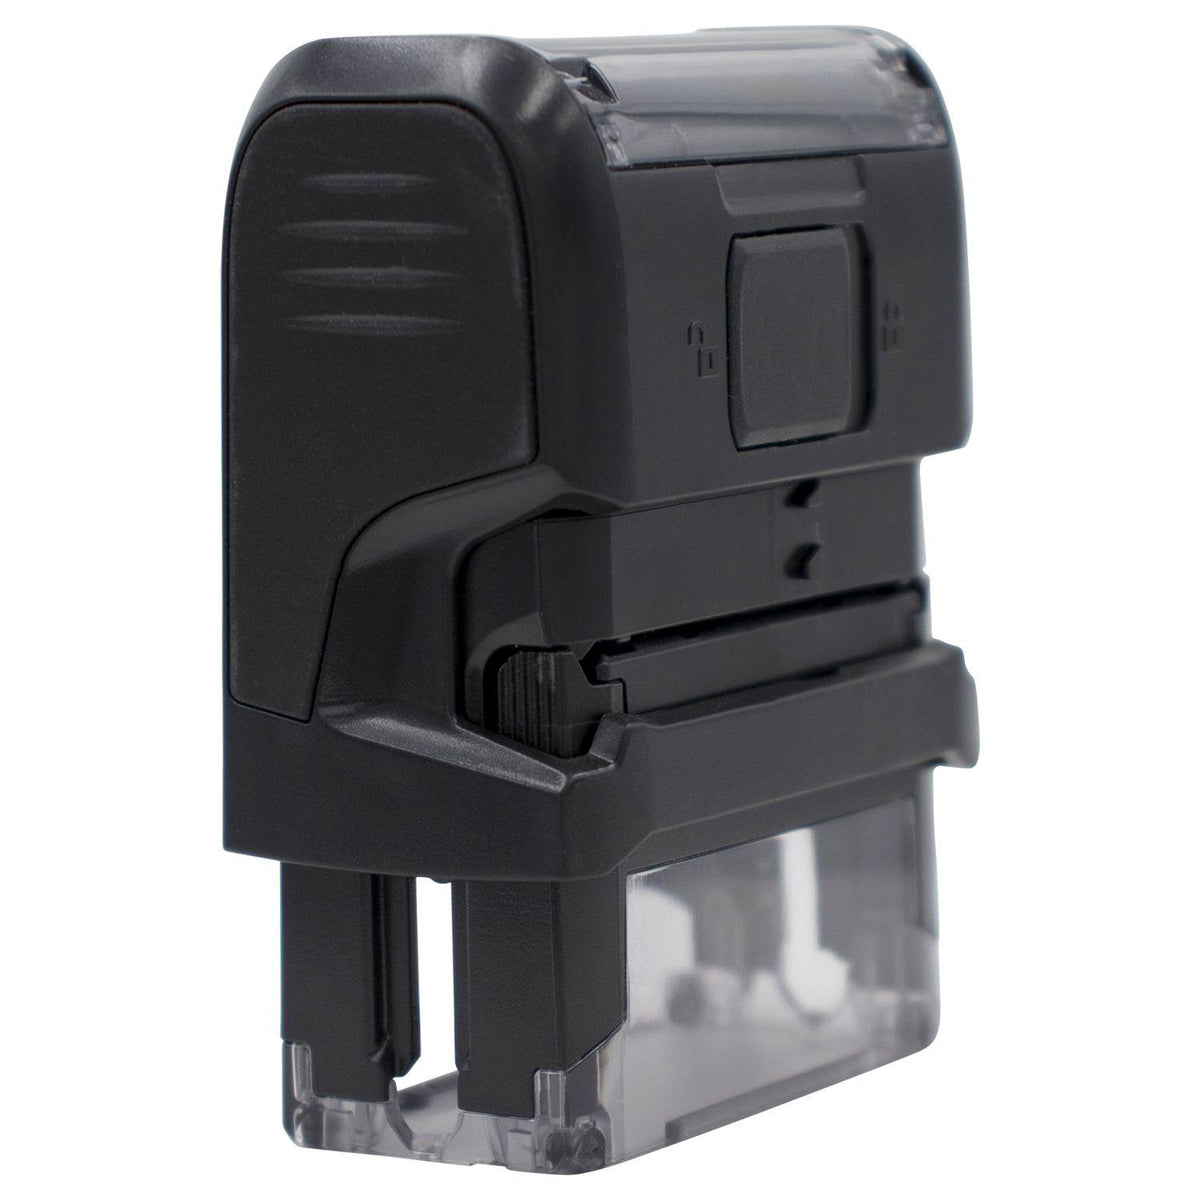 Self-Inking Global Air Parcel Post Stamp - Engineer Seal Stamps - Brand_Trodat, Impression Size_Small, Stamp Type_Self-Inking Stamp, Type of Use_Business, Type of Use_Postal &amp; Mailing